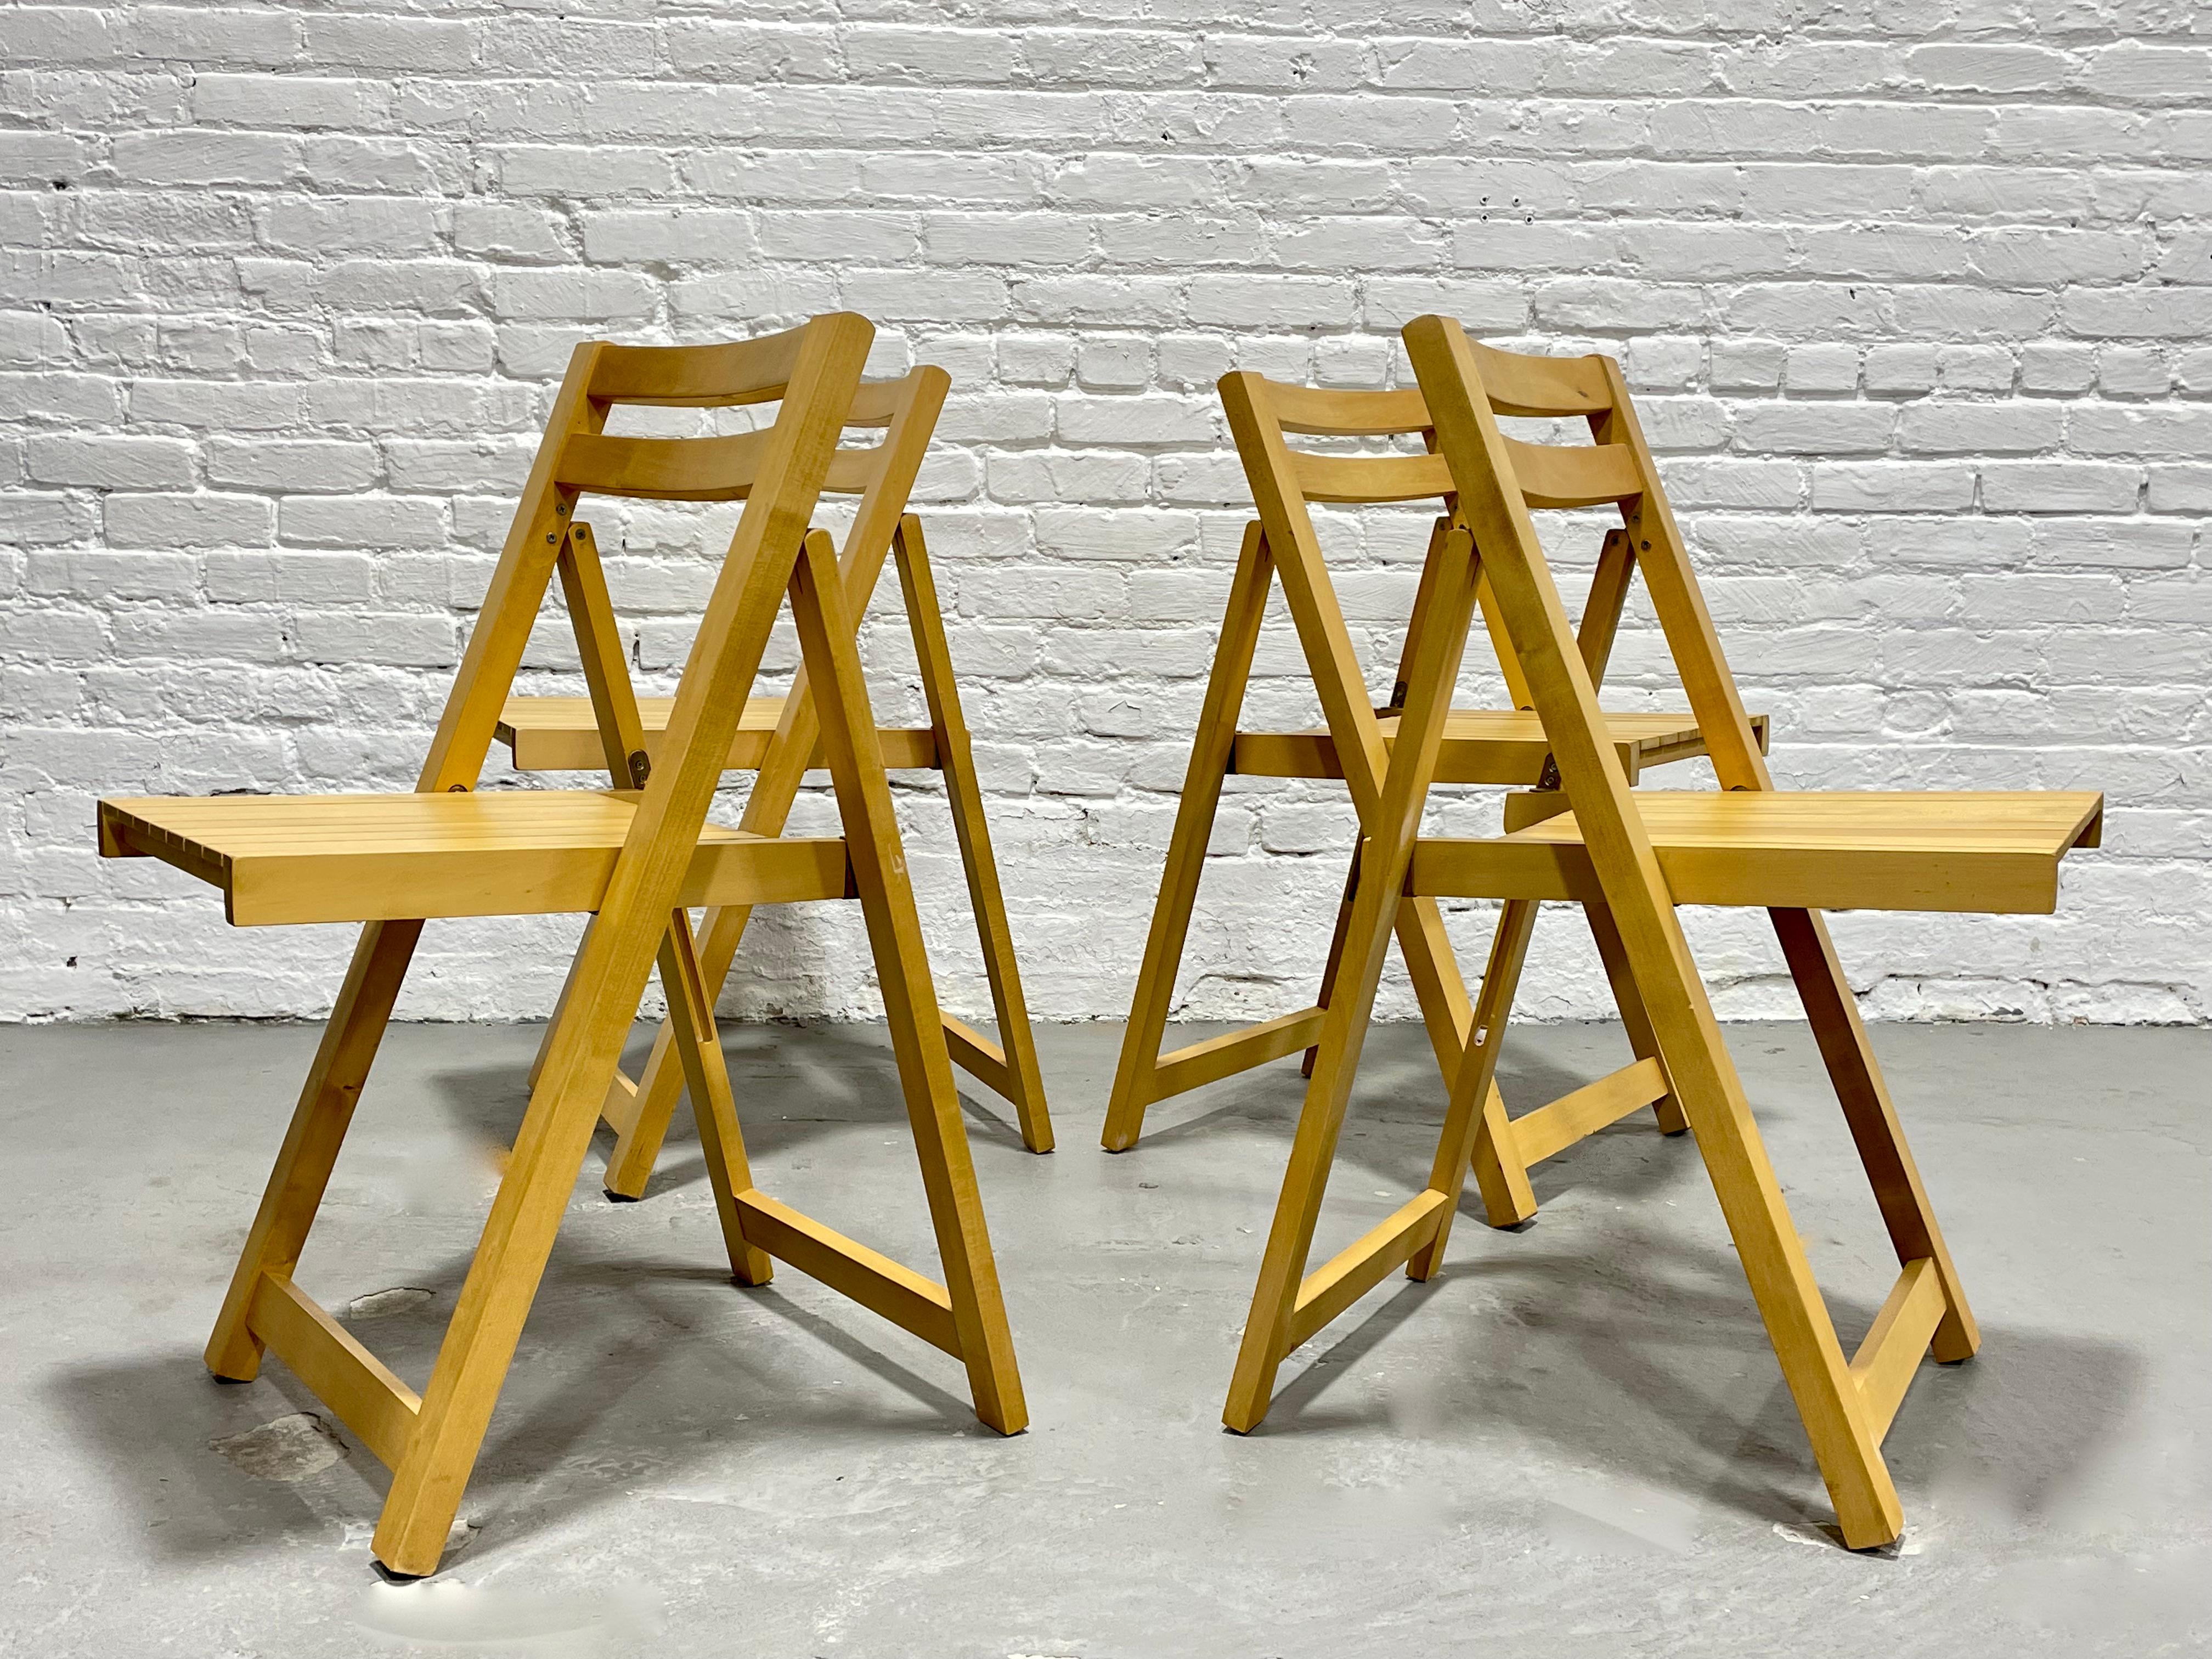 Mid Century Modern set of four solid beech folding chairs, made in Romania. This solid and sturdy set offers minimalist lines and looks amazing from every angle. The chairs fold completely flat for storage. Use these as your everyday set or store